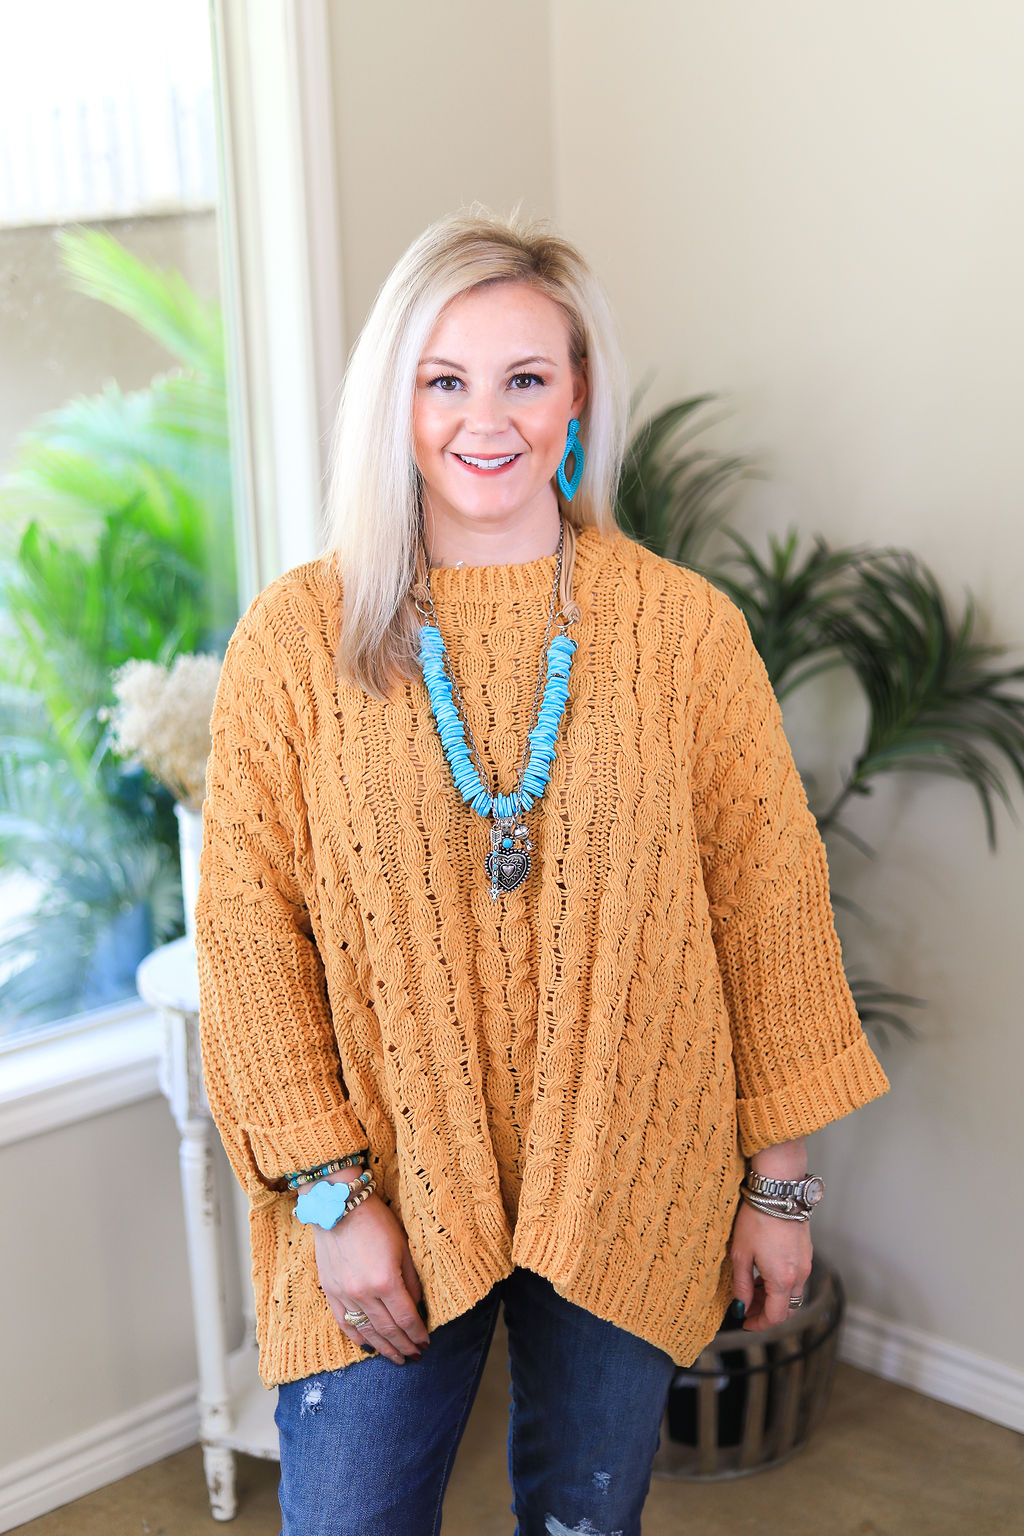 On My Level Chenille Cable Knit Pullover Sweater in Mustard Yellow - Giddy Up Glamour Boutique